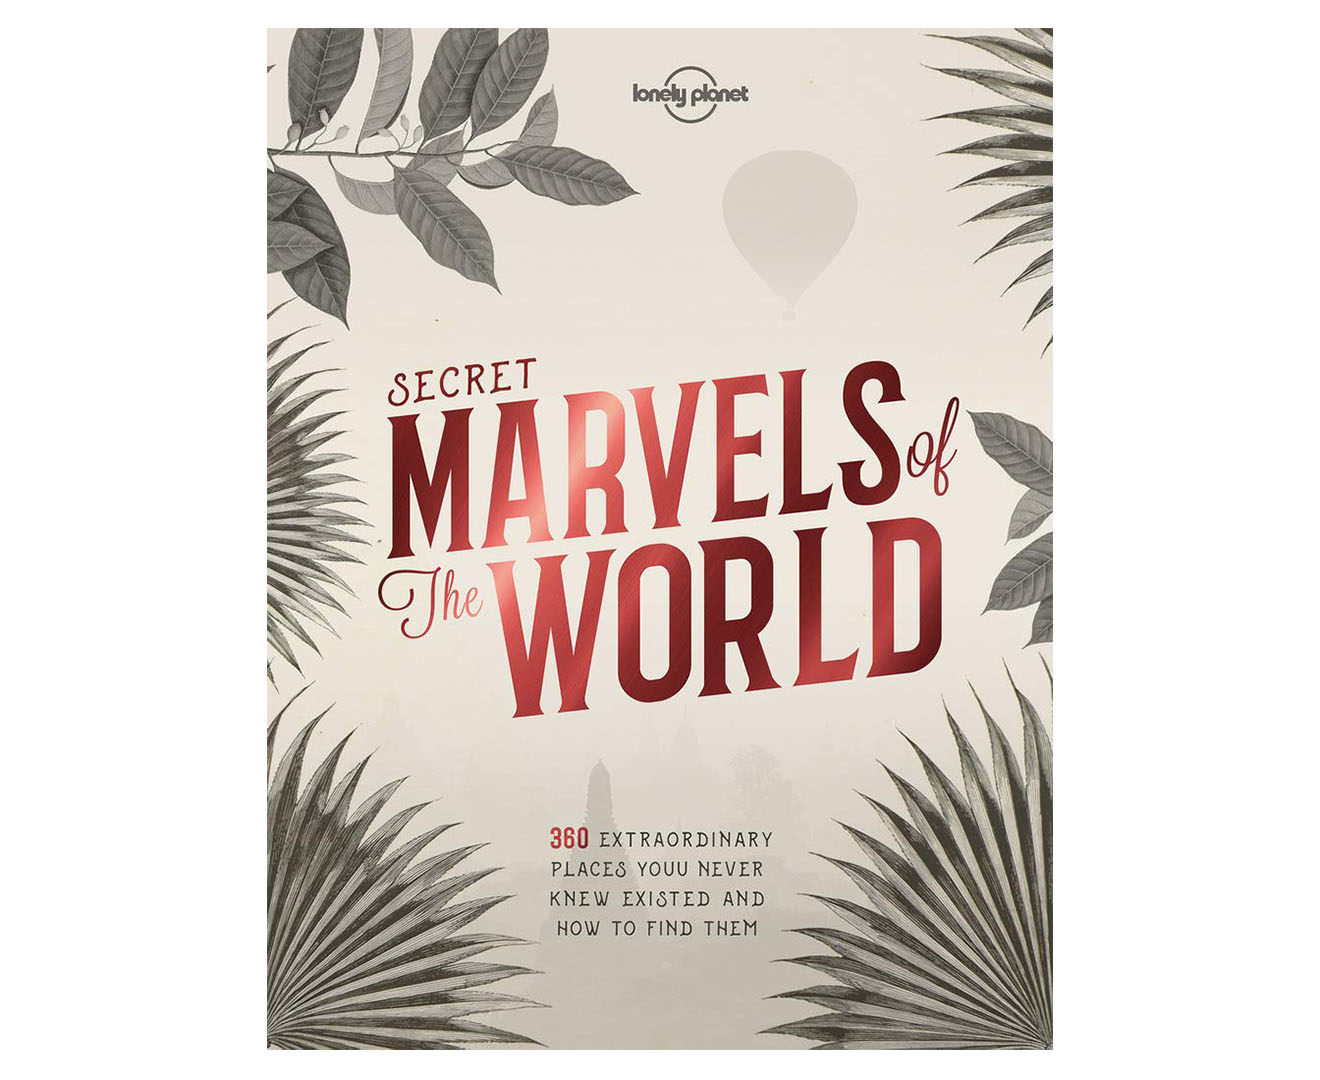 Planet　Lonely　World　The　Of　Marvels　Secret　Guide　Hardcover　Travel